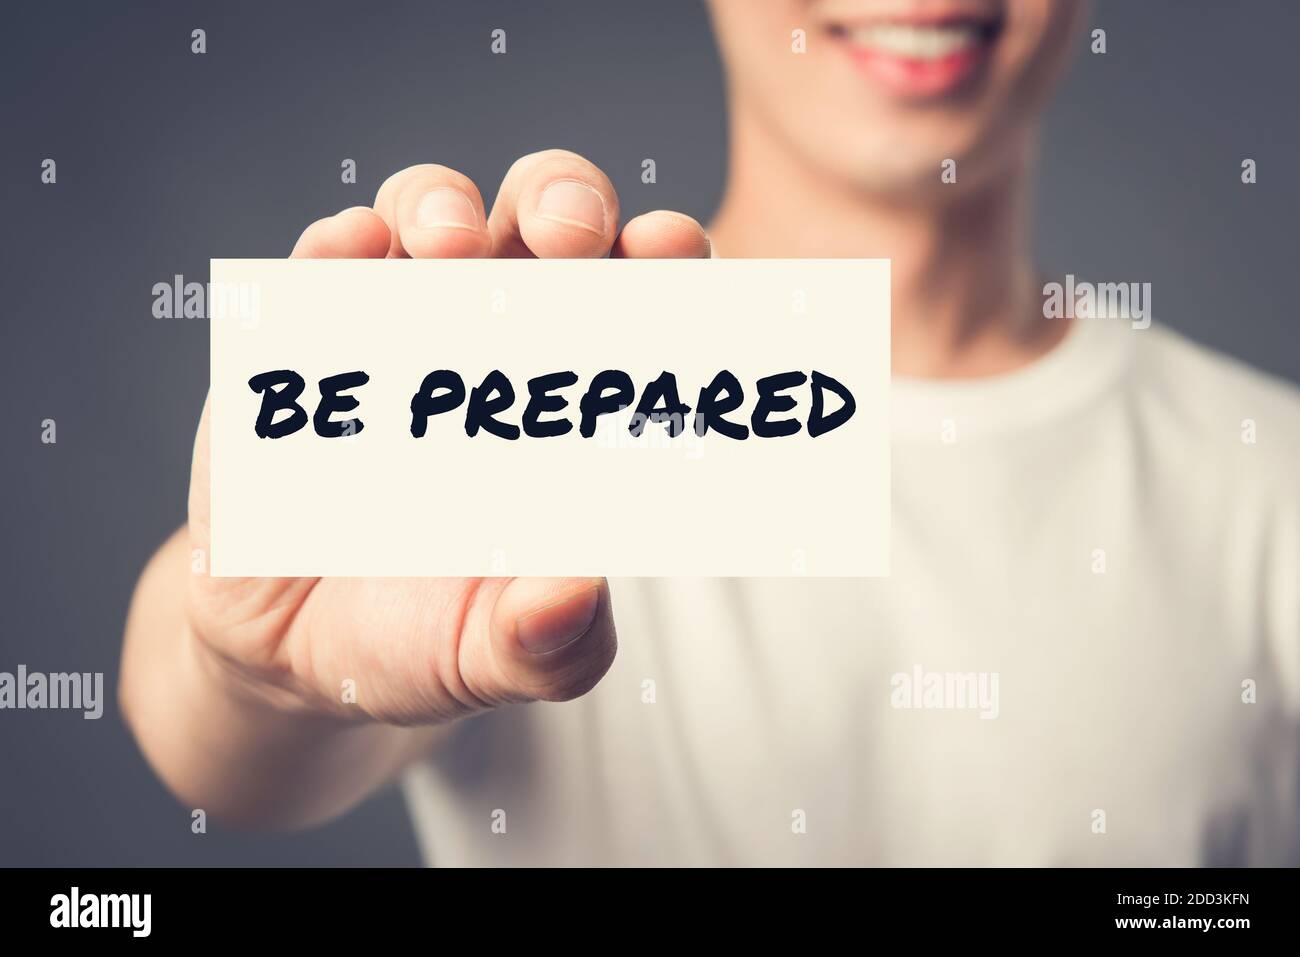 BE PREPARED, message on the card shown by a man, vintage tone effect Stock Photo